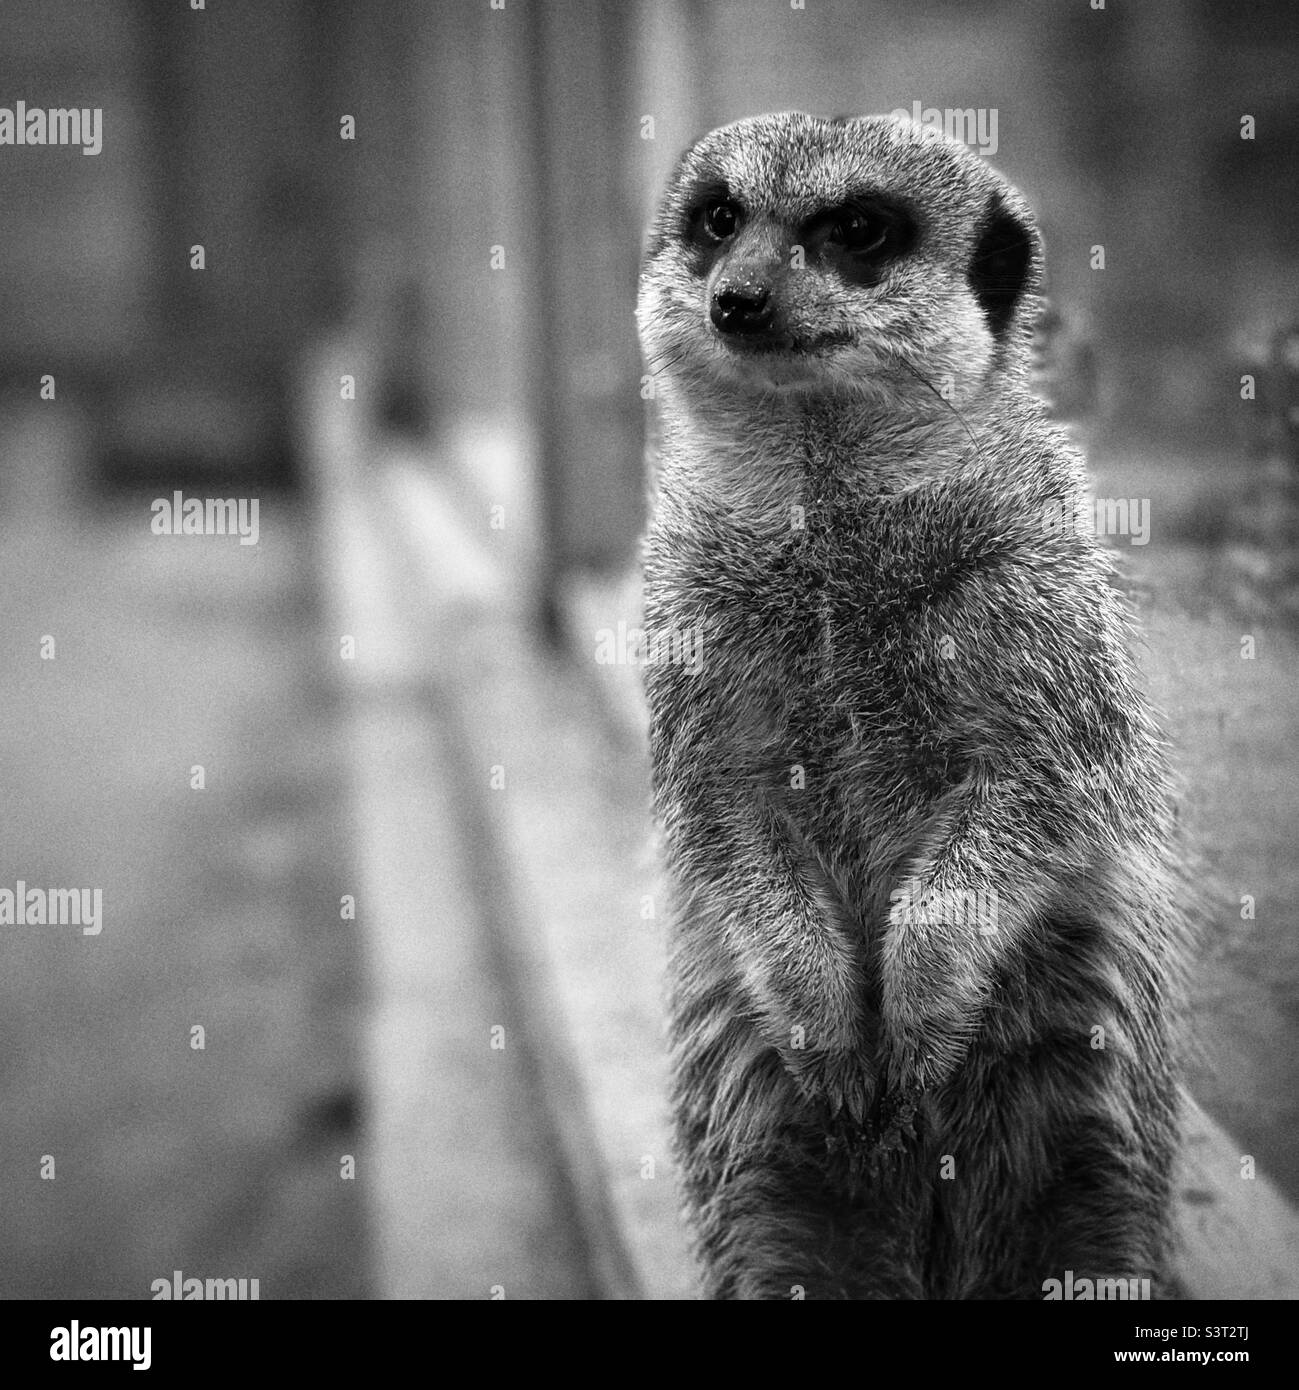 Black and white portrait of a meerkat keeping watch Stock Photo